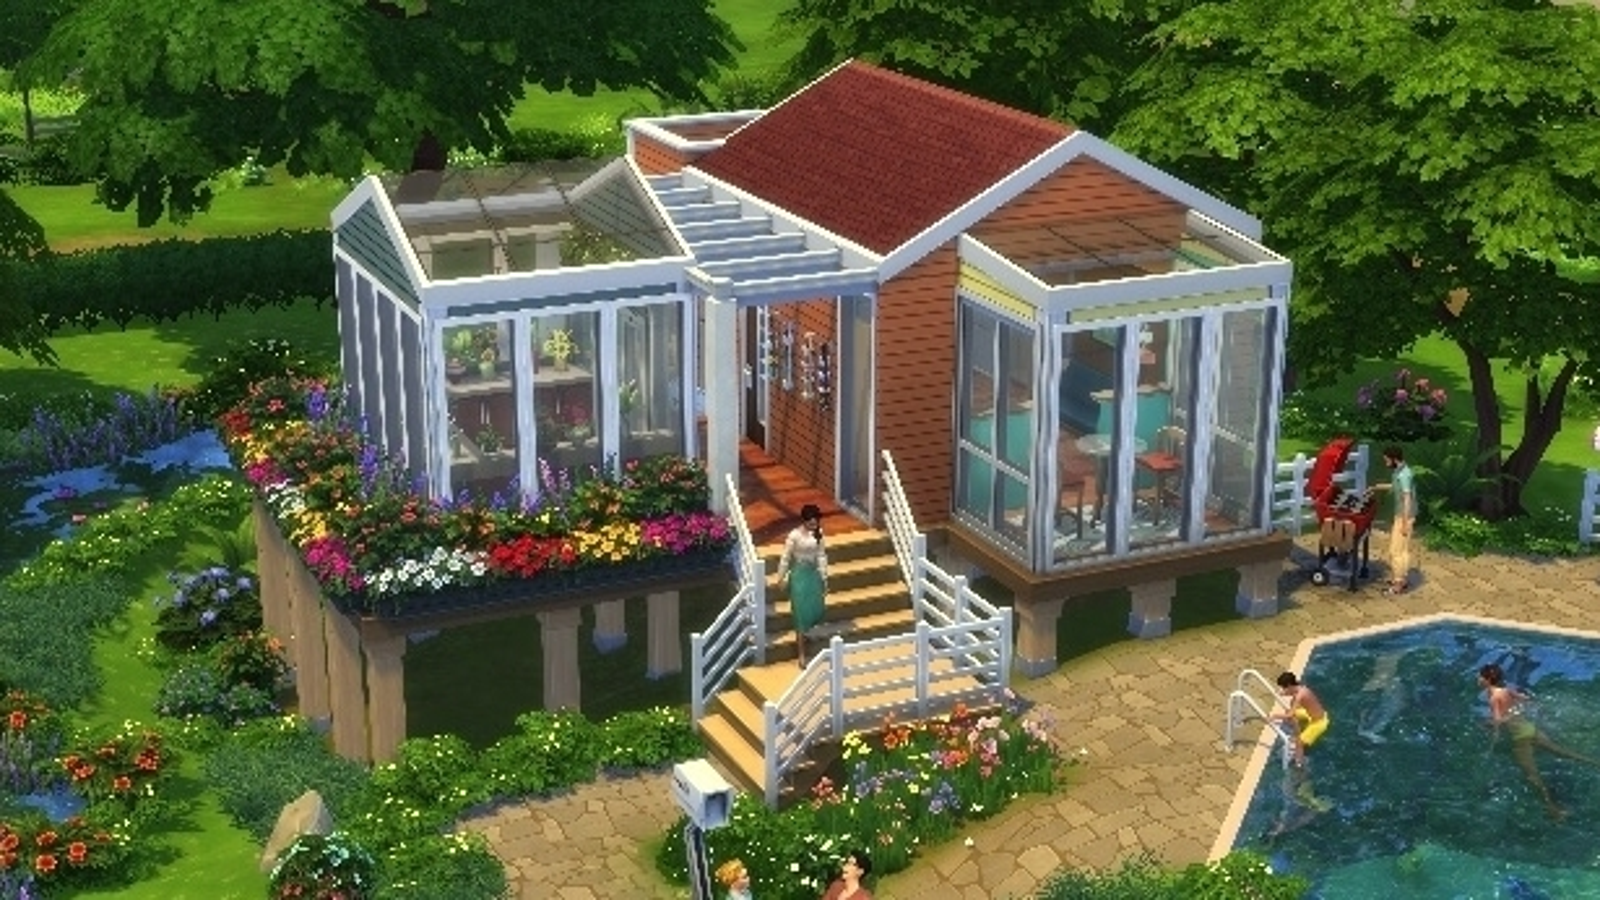 Base Game Tiny House // The Sims 4 Speed Build 